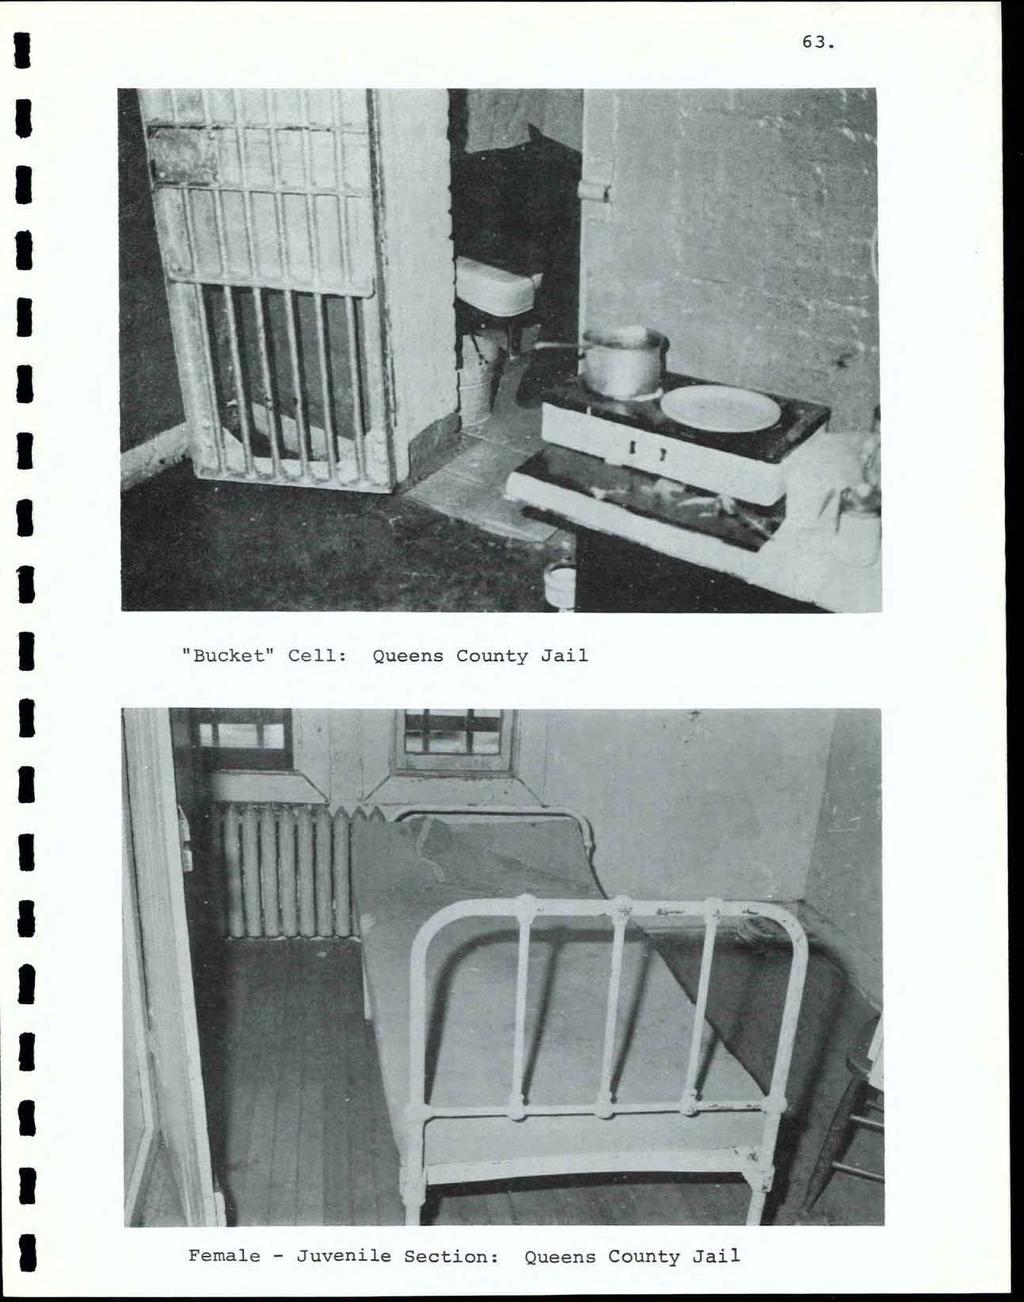 63. "Bucket" Cell: Queens County Jail